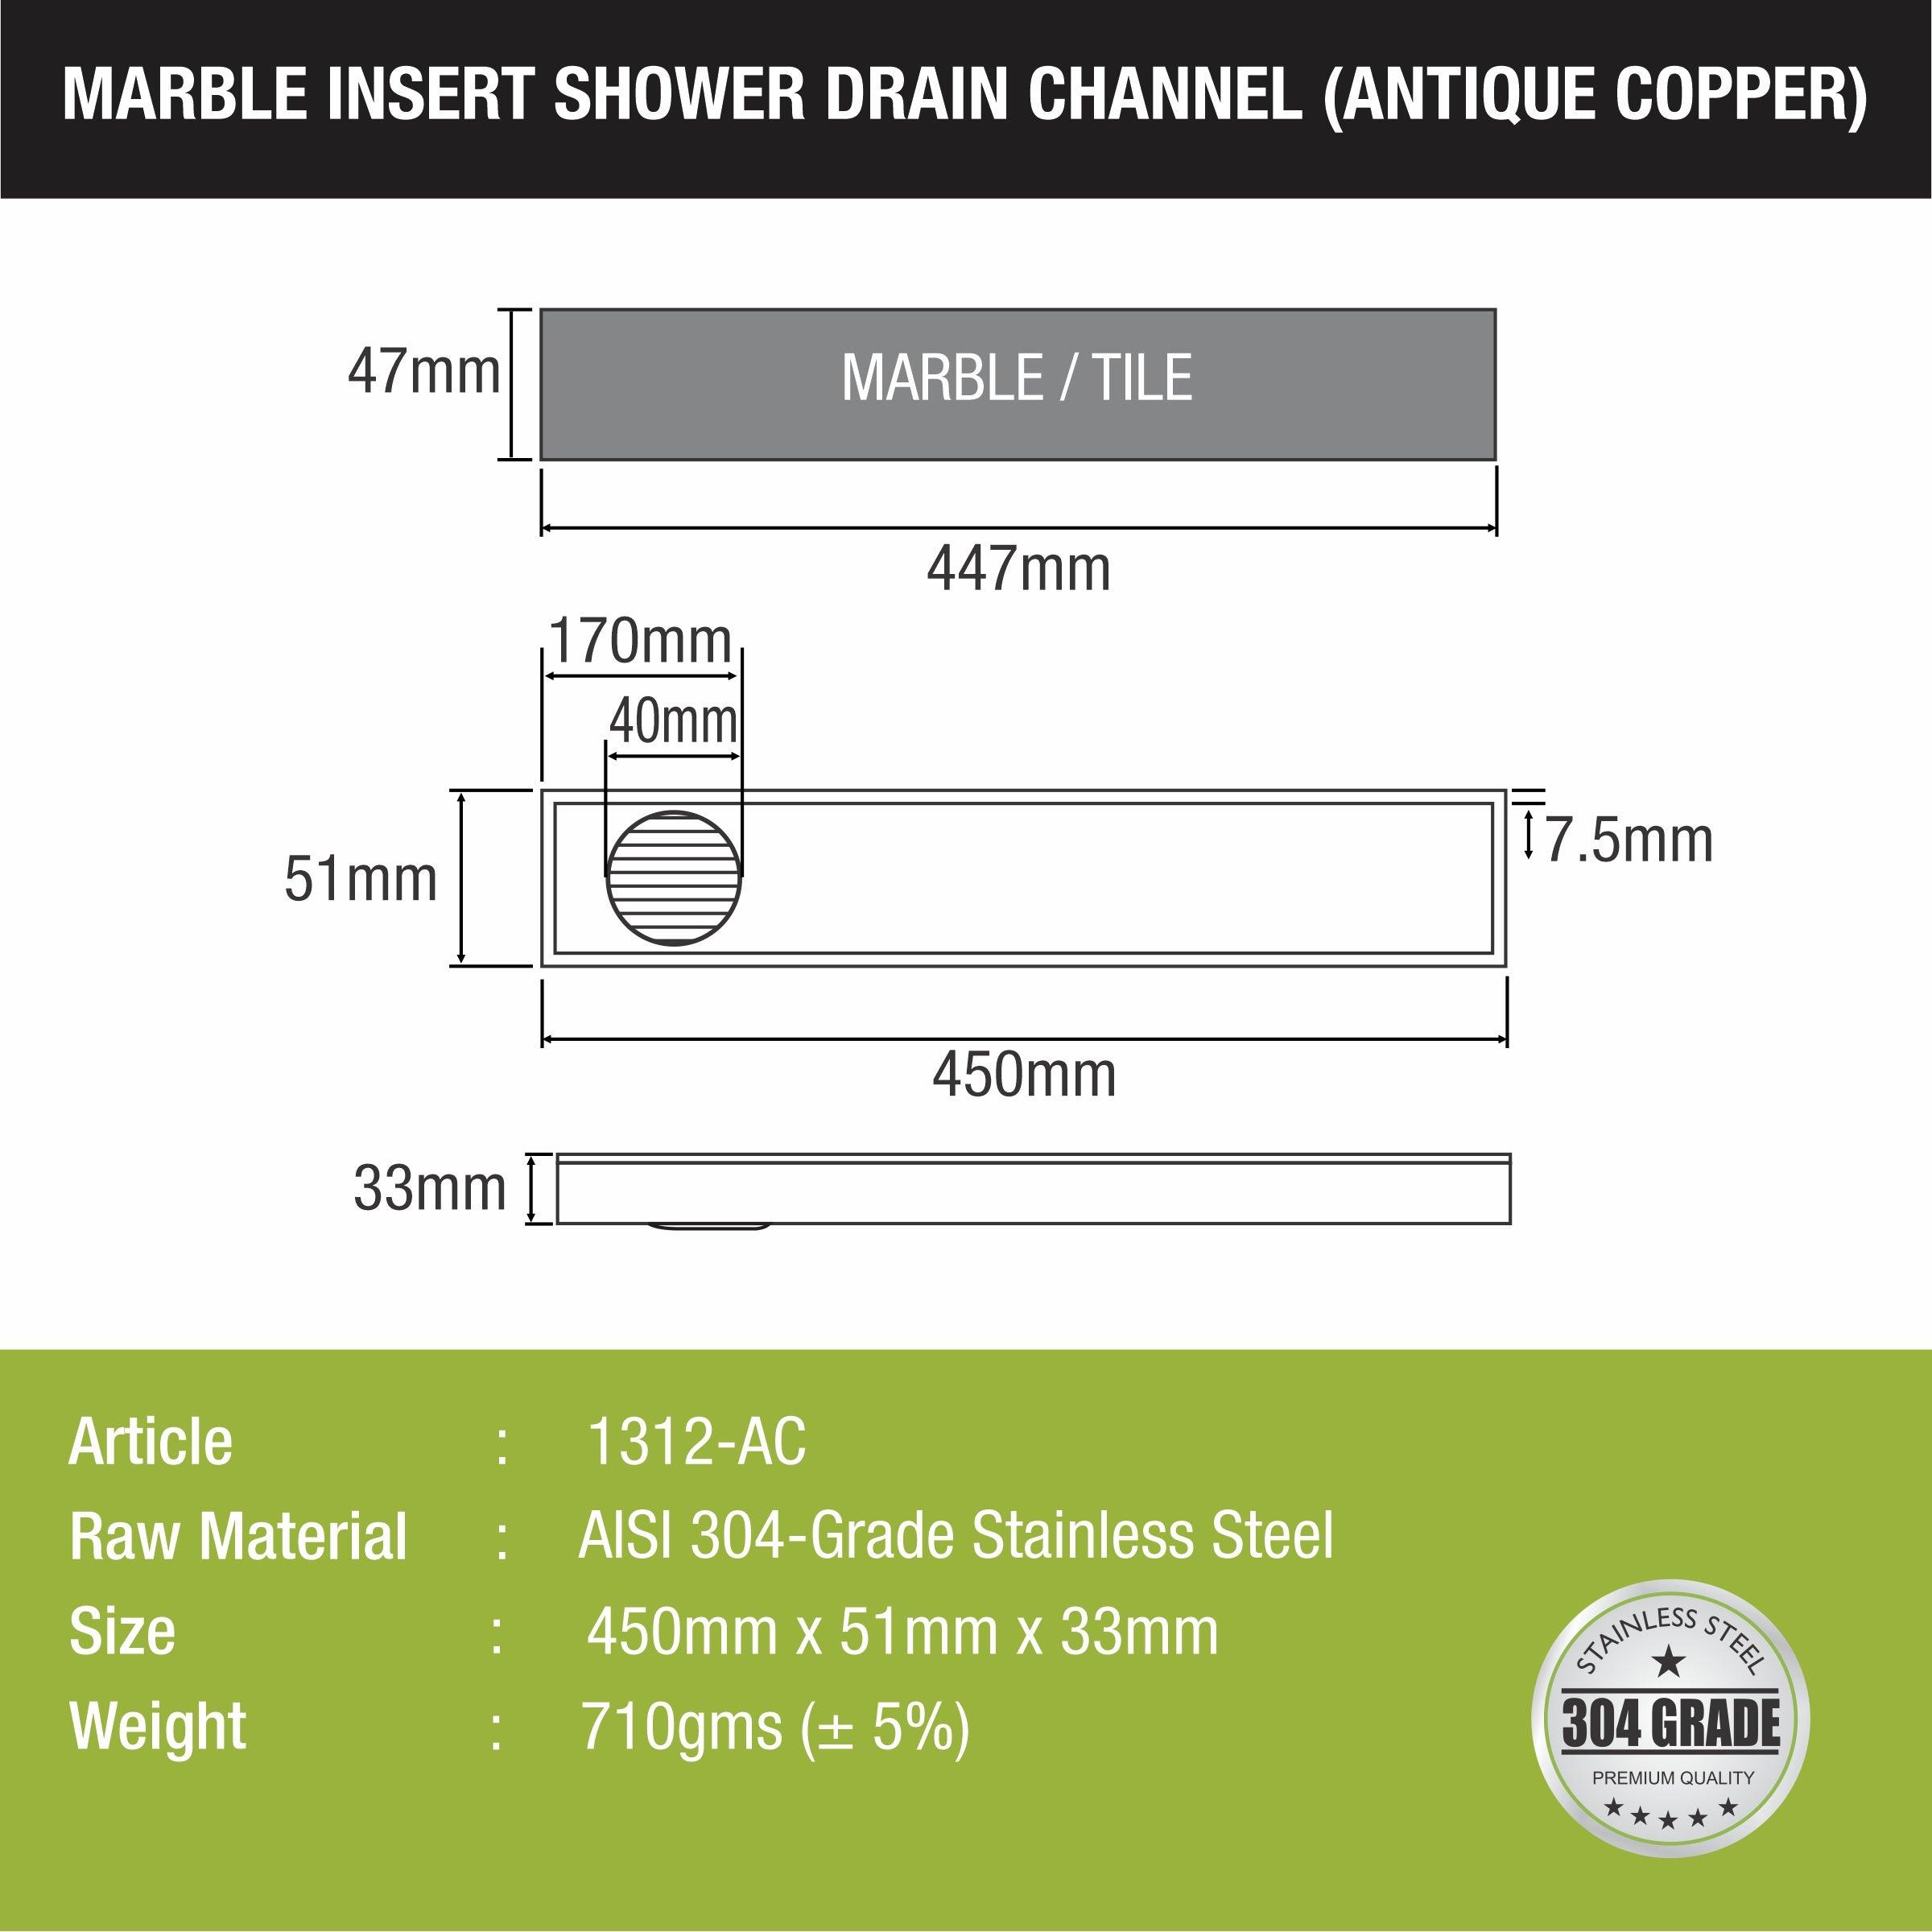 Marble Insert Shower Drain Channel - Antique Copper (18 x 2 Inches) sizes and dimensions